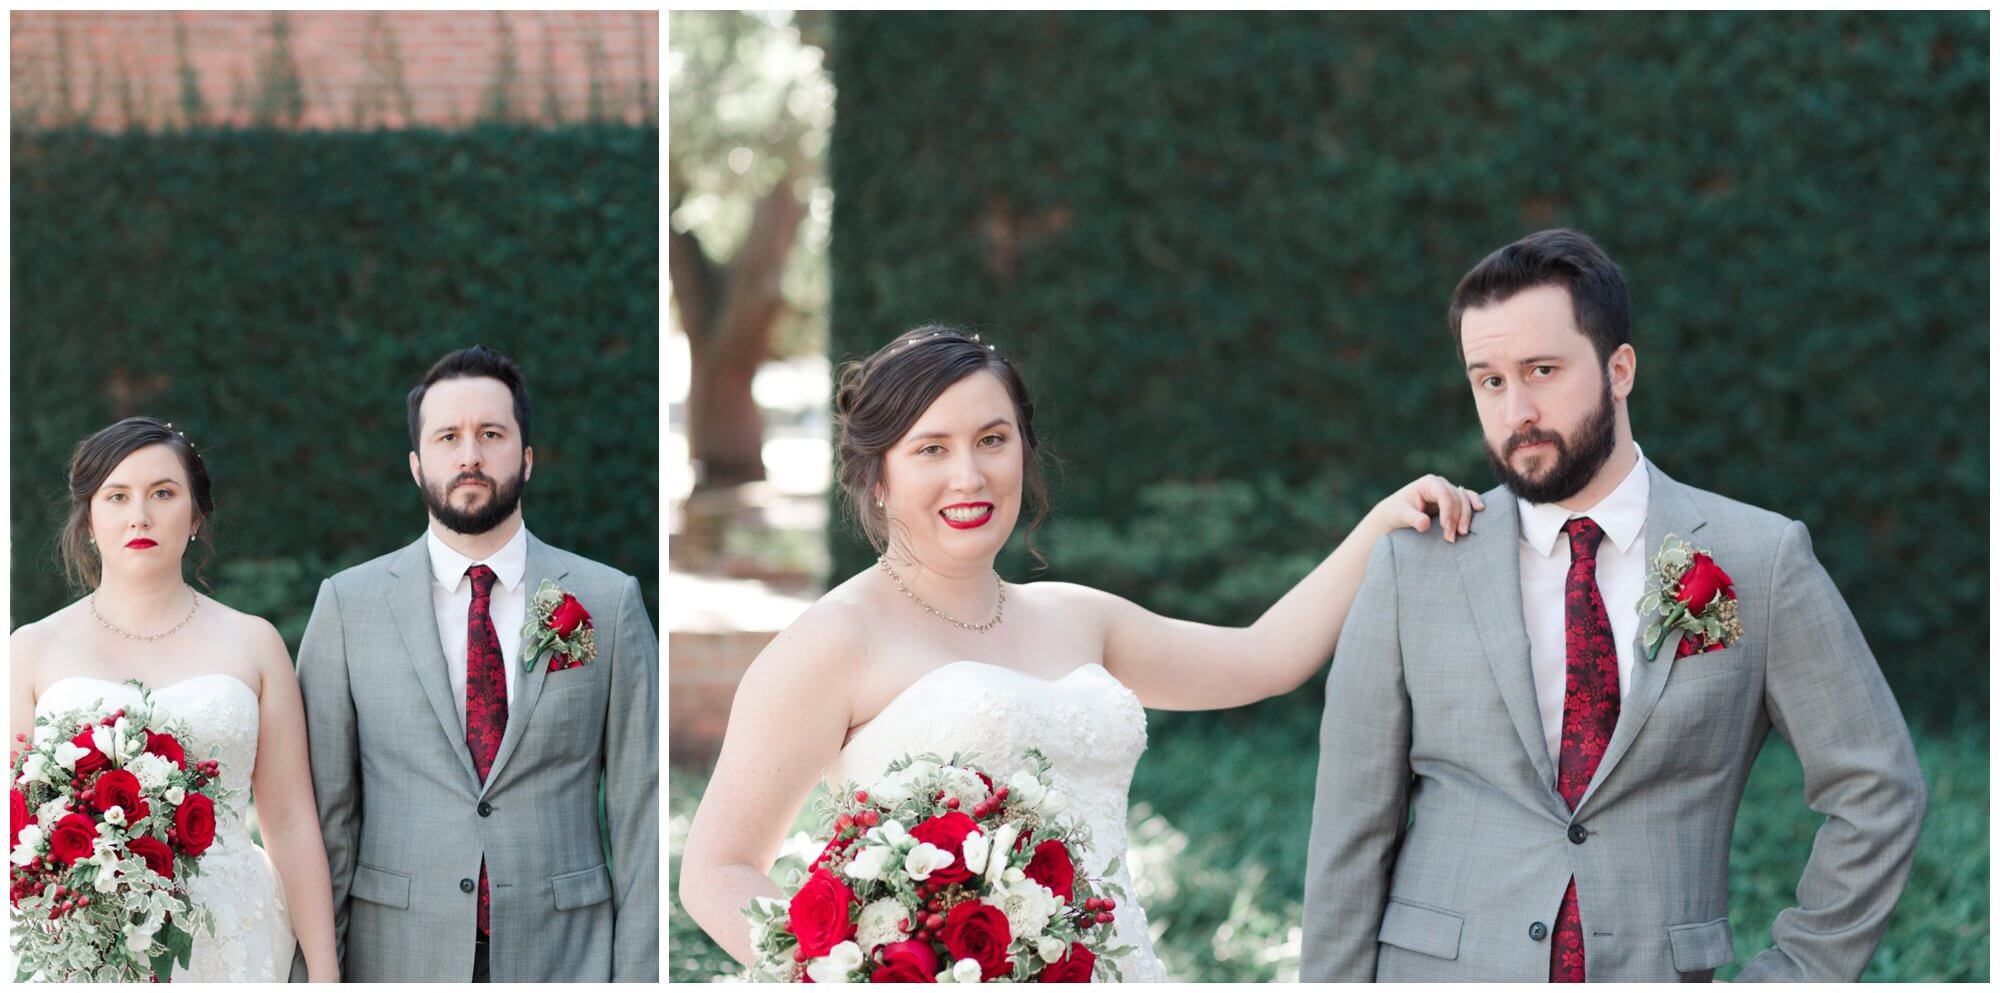 bride and groom portraits at Rice University in Houston Texas by Swish and Click Photography